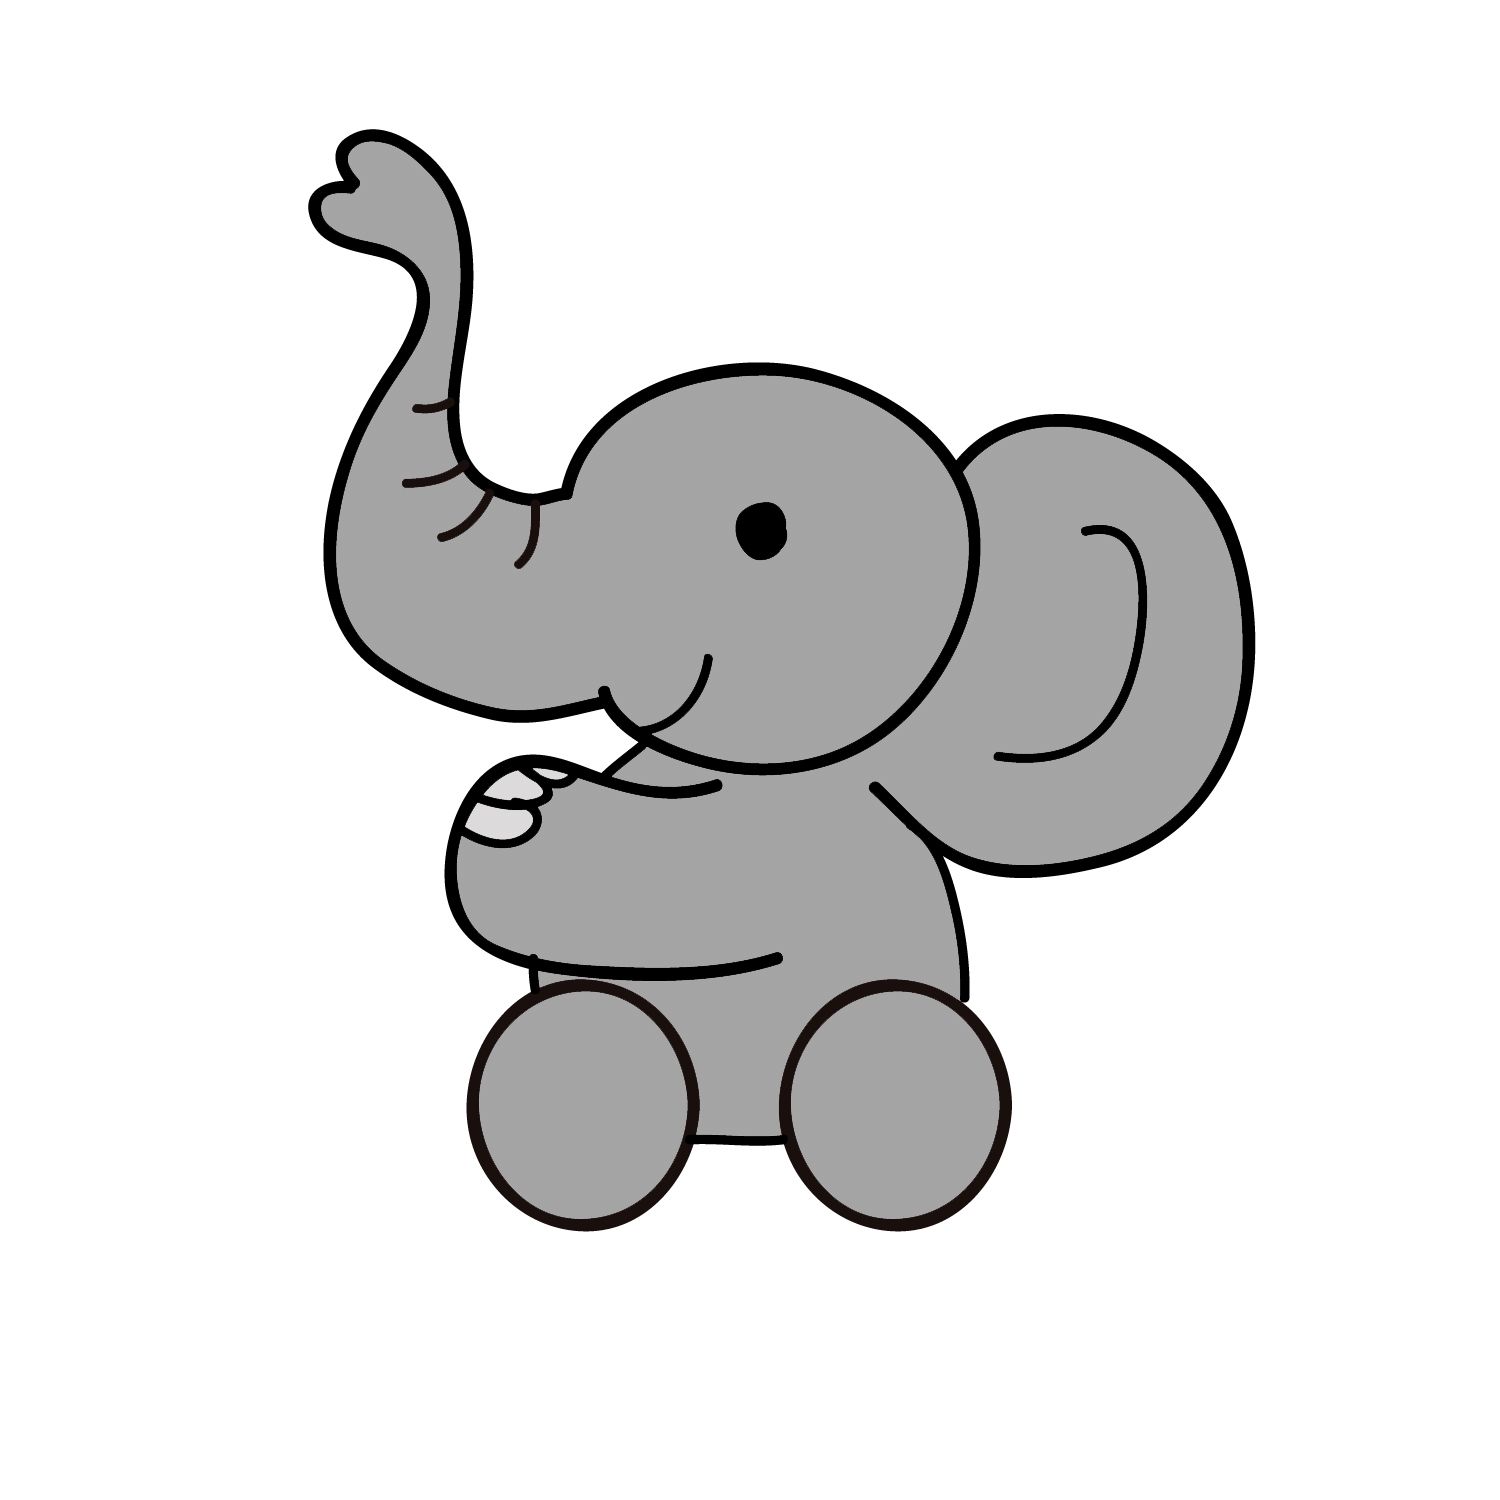 Free Elephant Cartoons Picture, Download Free Clip Art, Free Clip Art on Clipart Library